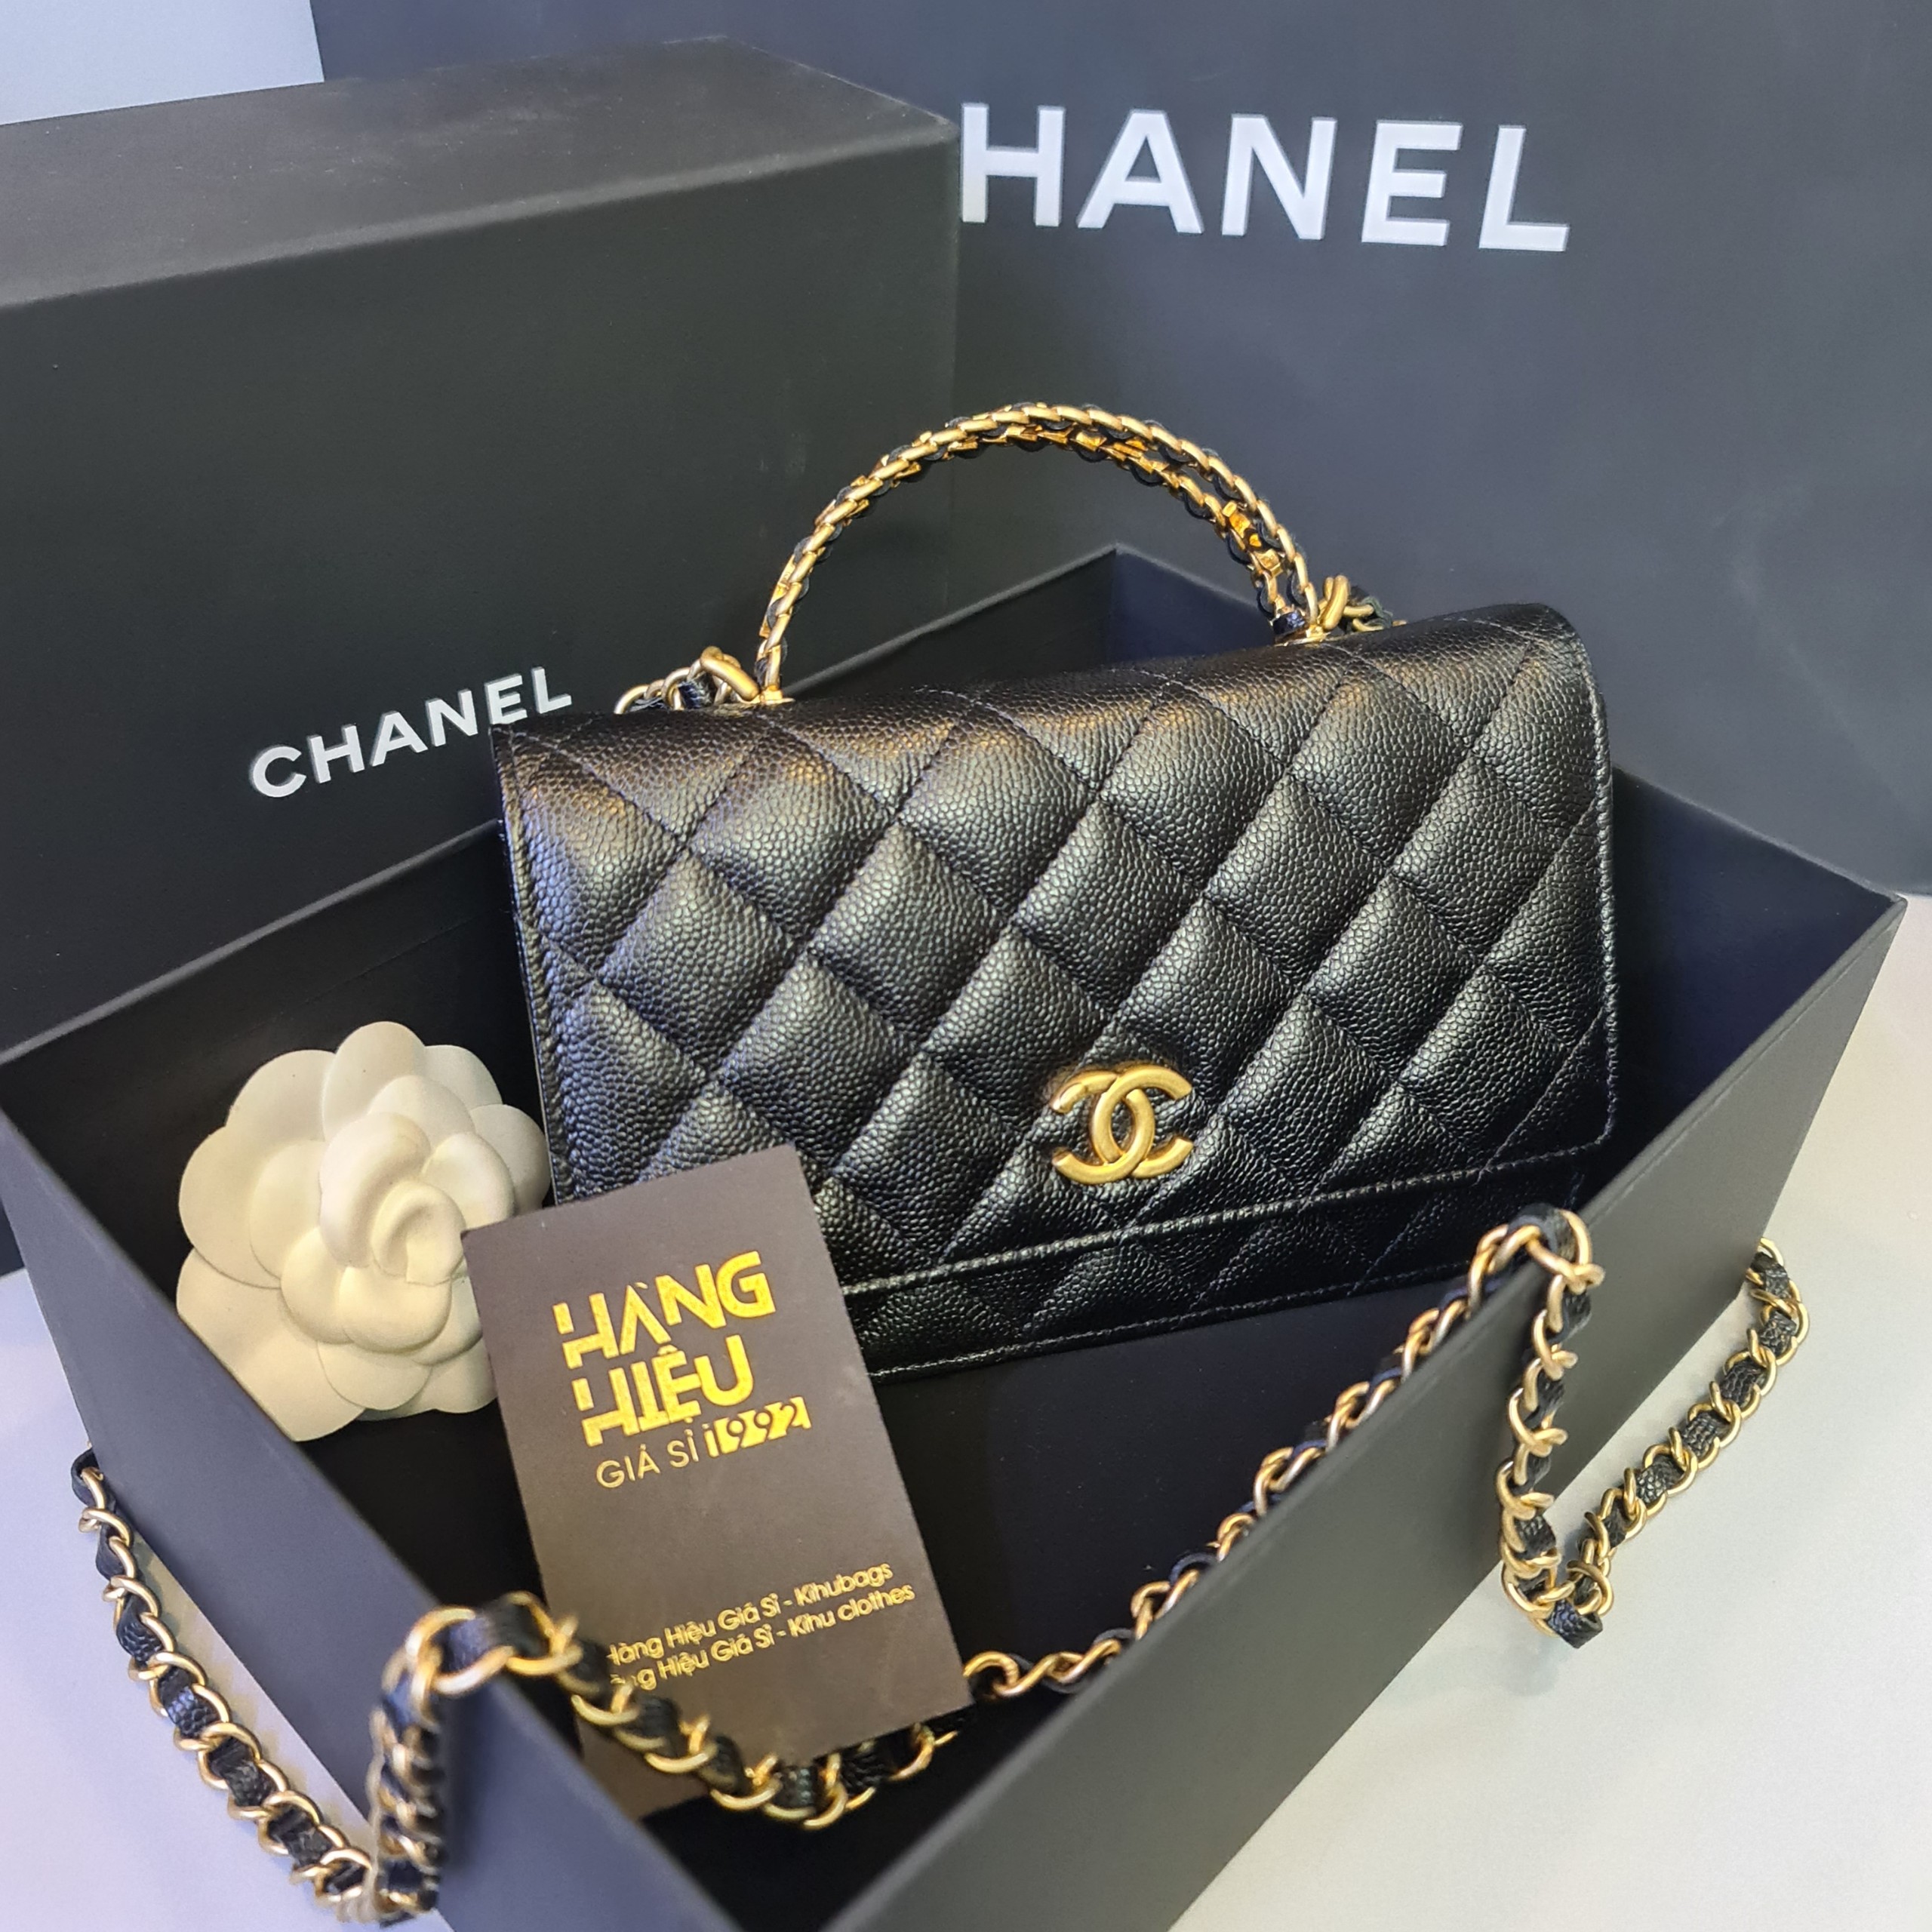 19 Chanel Wallet on a Chain Outfits ideas  chanel wallet chain outfit chanel  bag